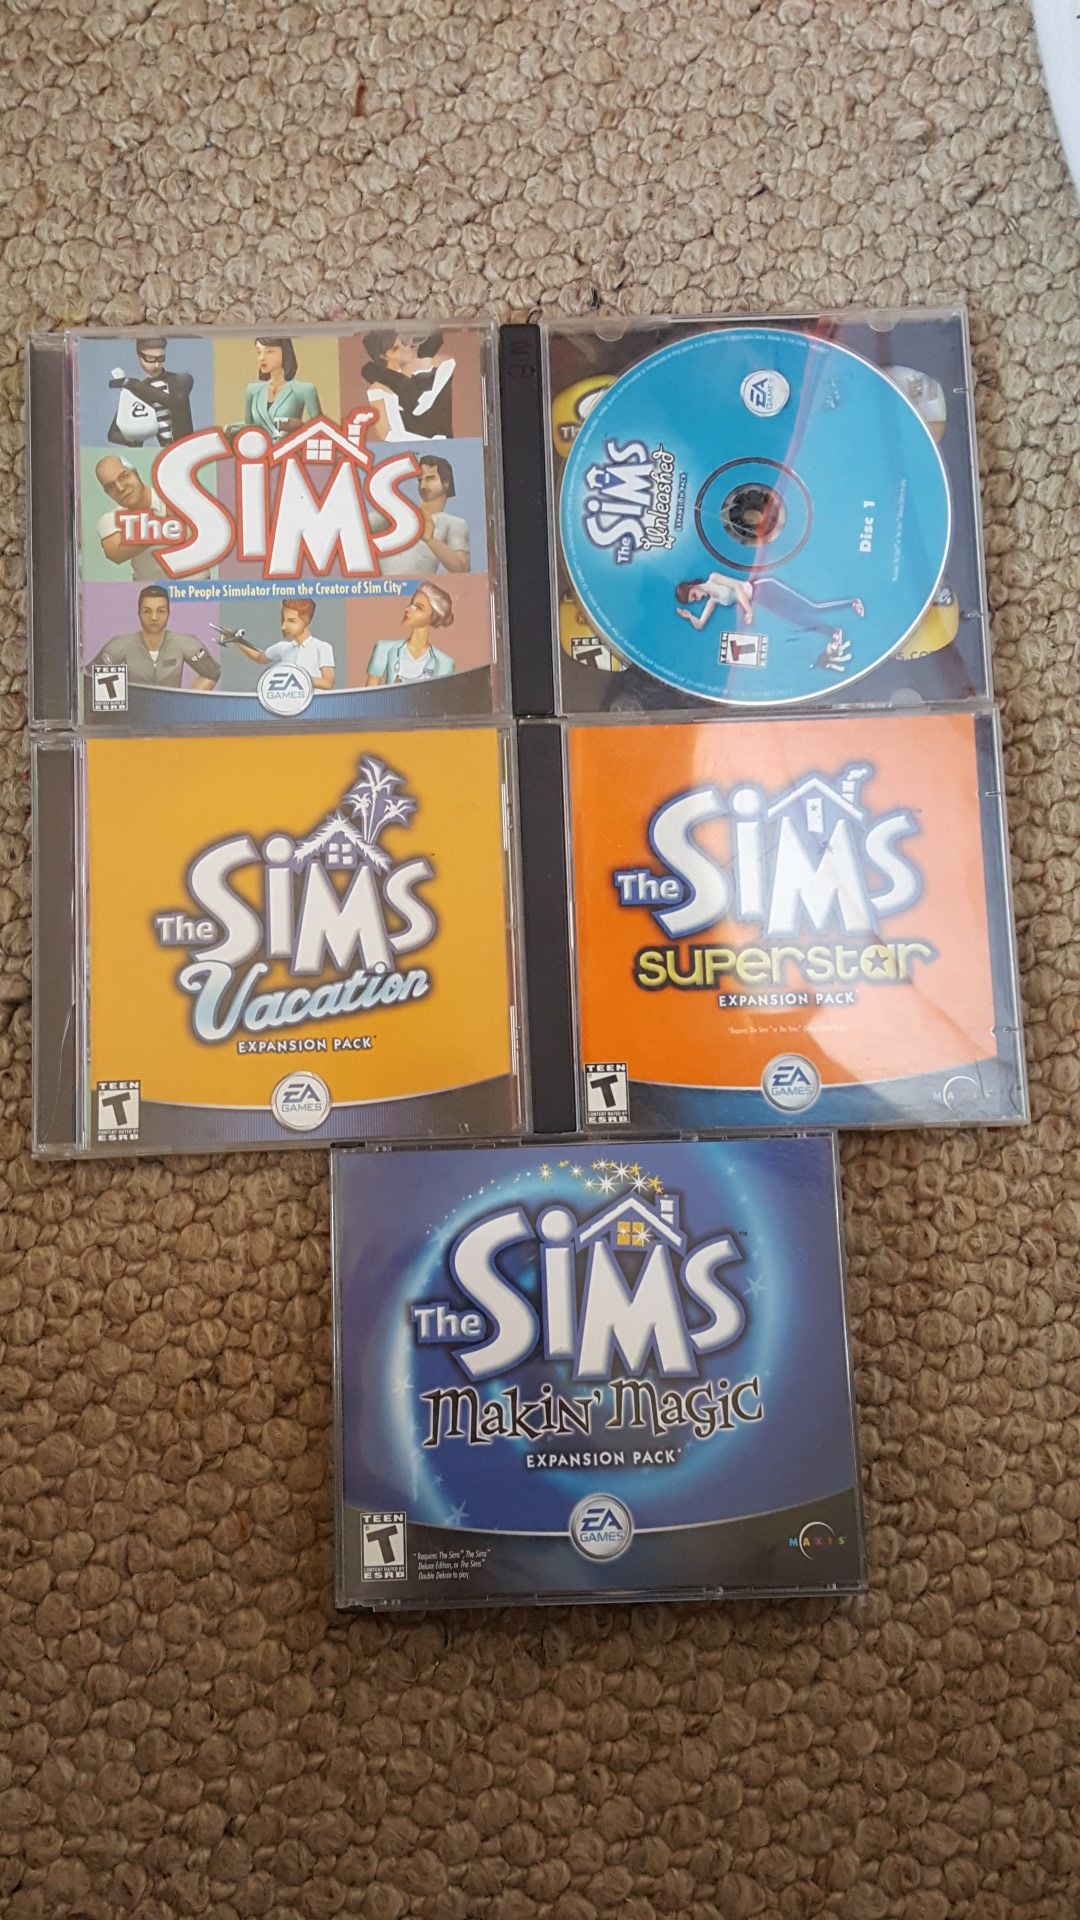 Sims and expansion packs